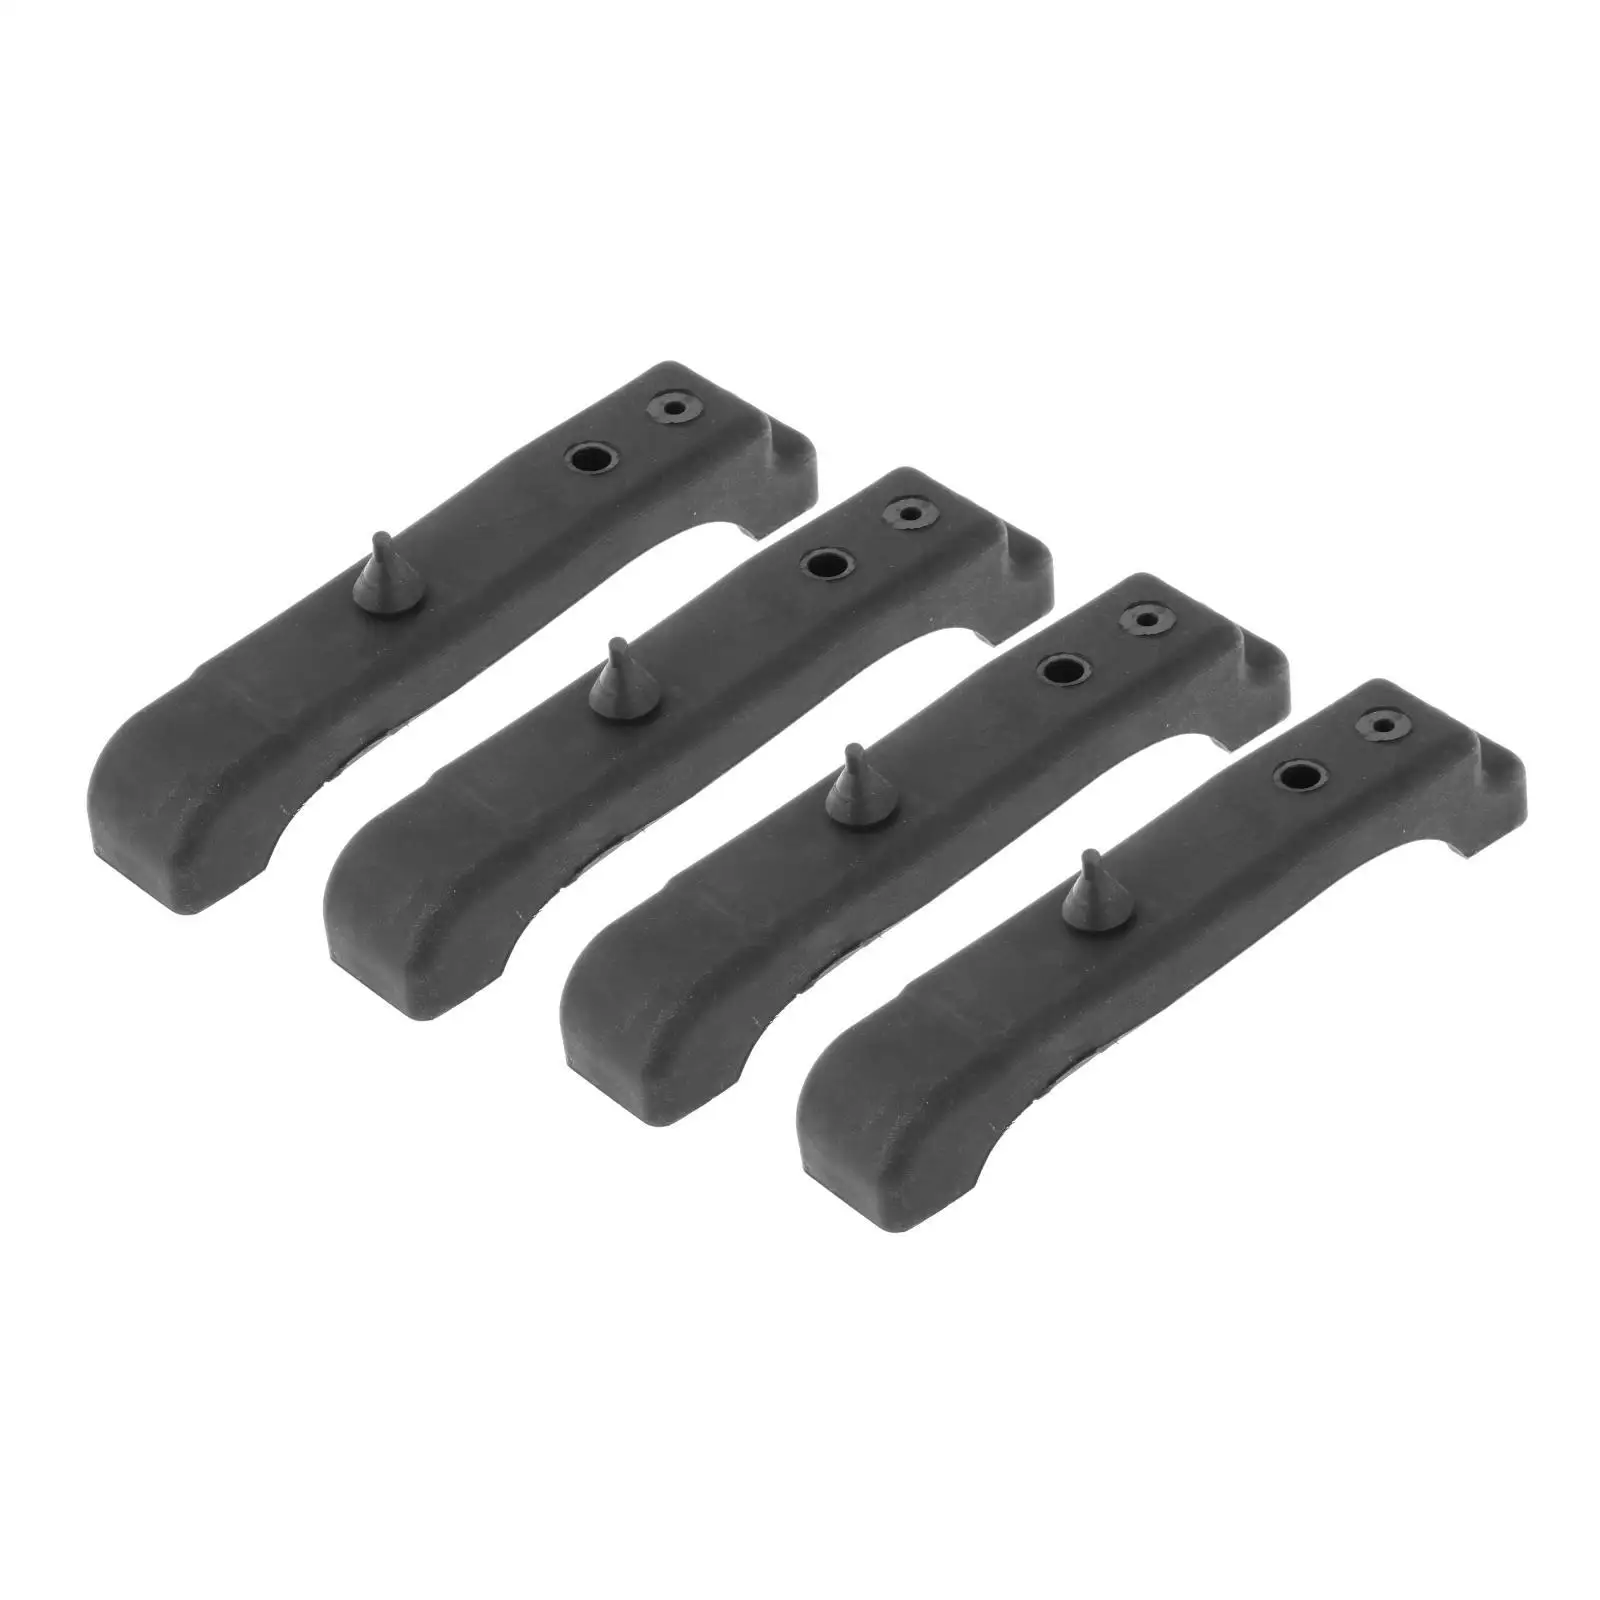 4x Cars Rubber 4 Core Radiator Mounting Cushions Support Pads, Fit for GM 1968-1981 4012-326-682S, Black